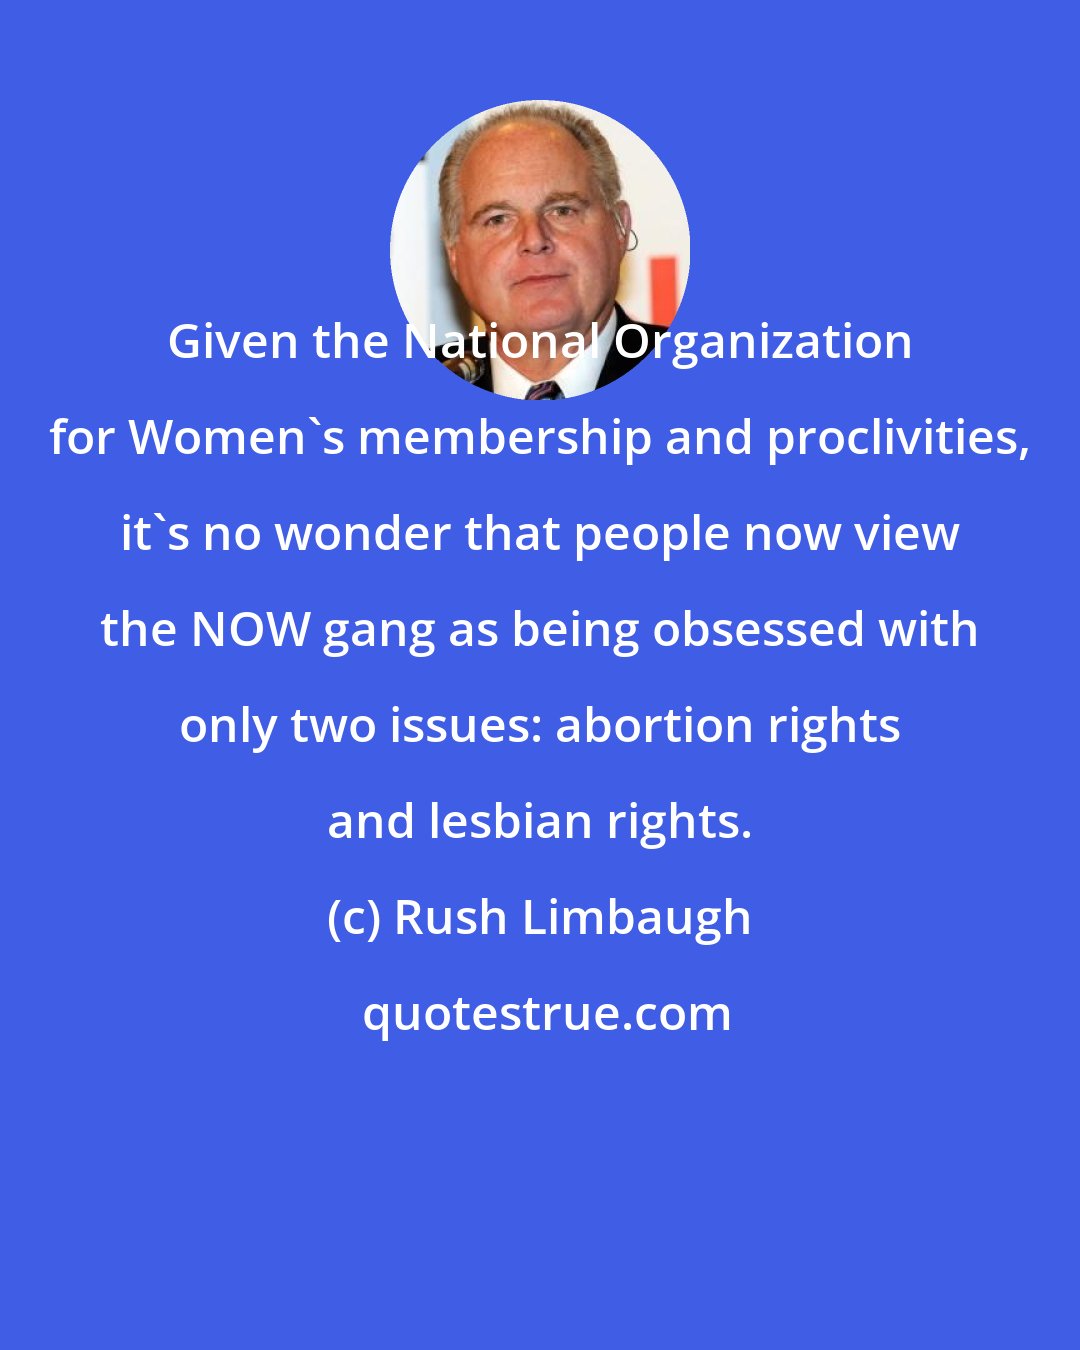 Rush Limbaugh: Given the National Organization for Women's membership and proclivities, it's no wonder that people now view the NOW gang as being obsessed with only two issues: abortion rights and lesbian rights.